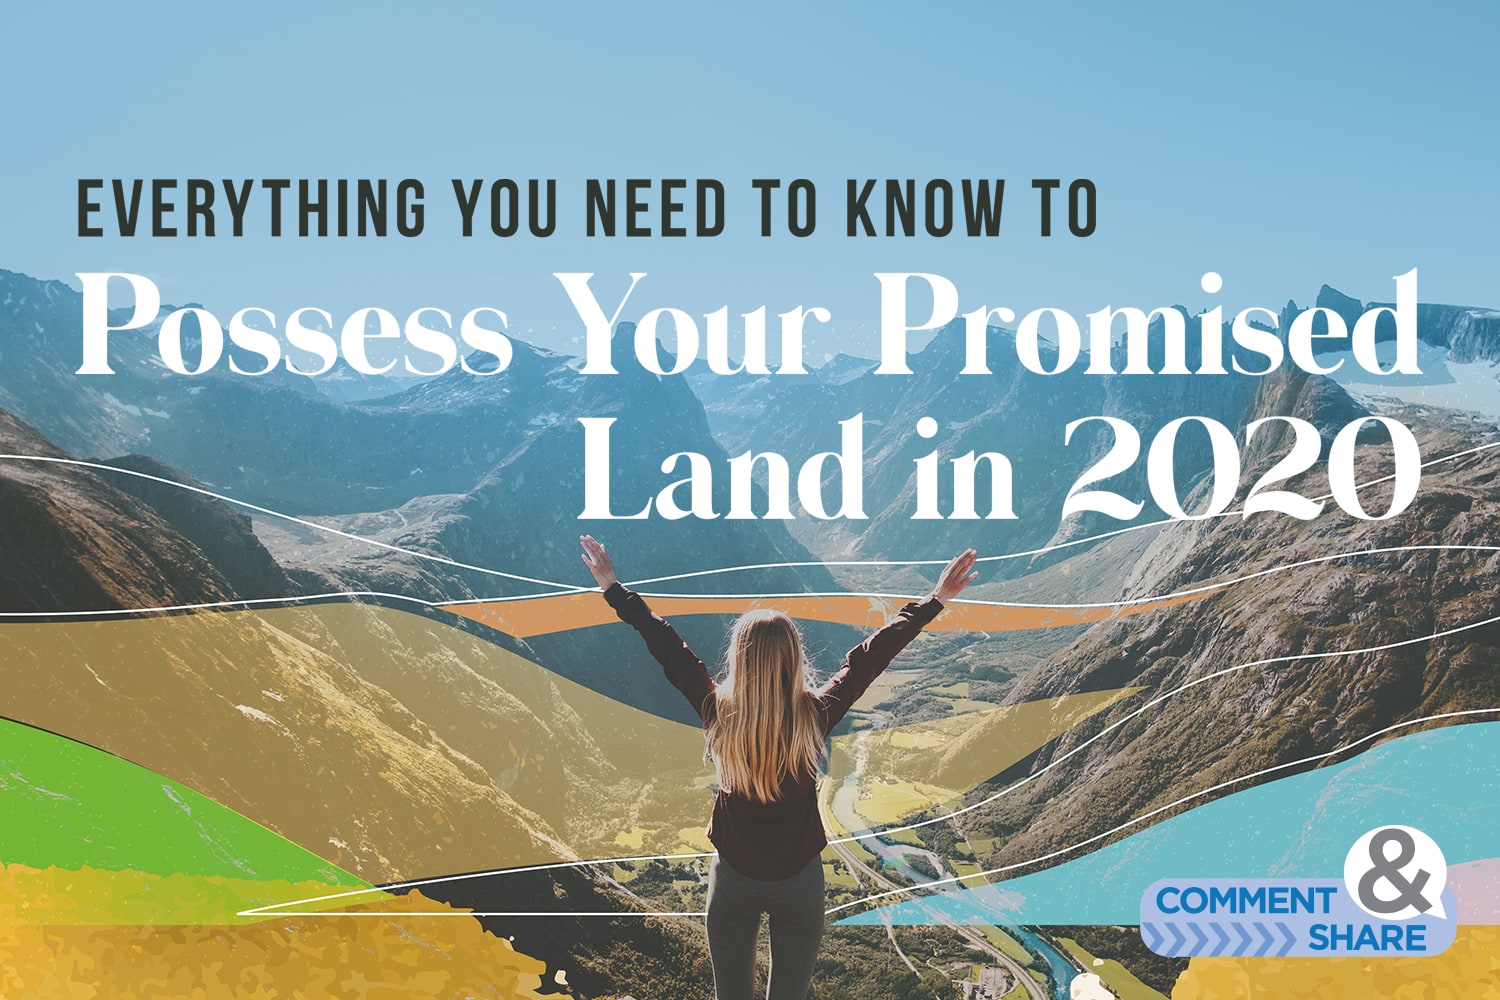 Promised Land - Get There Through Gods Power